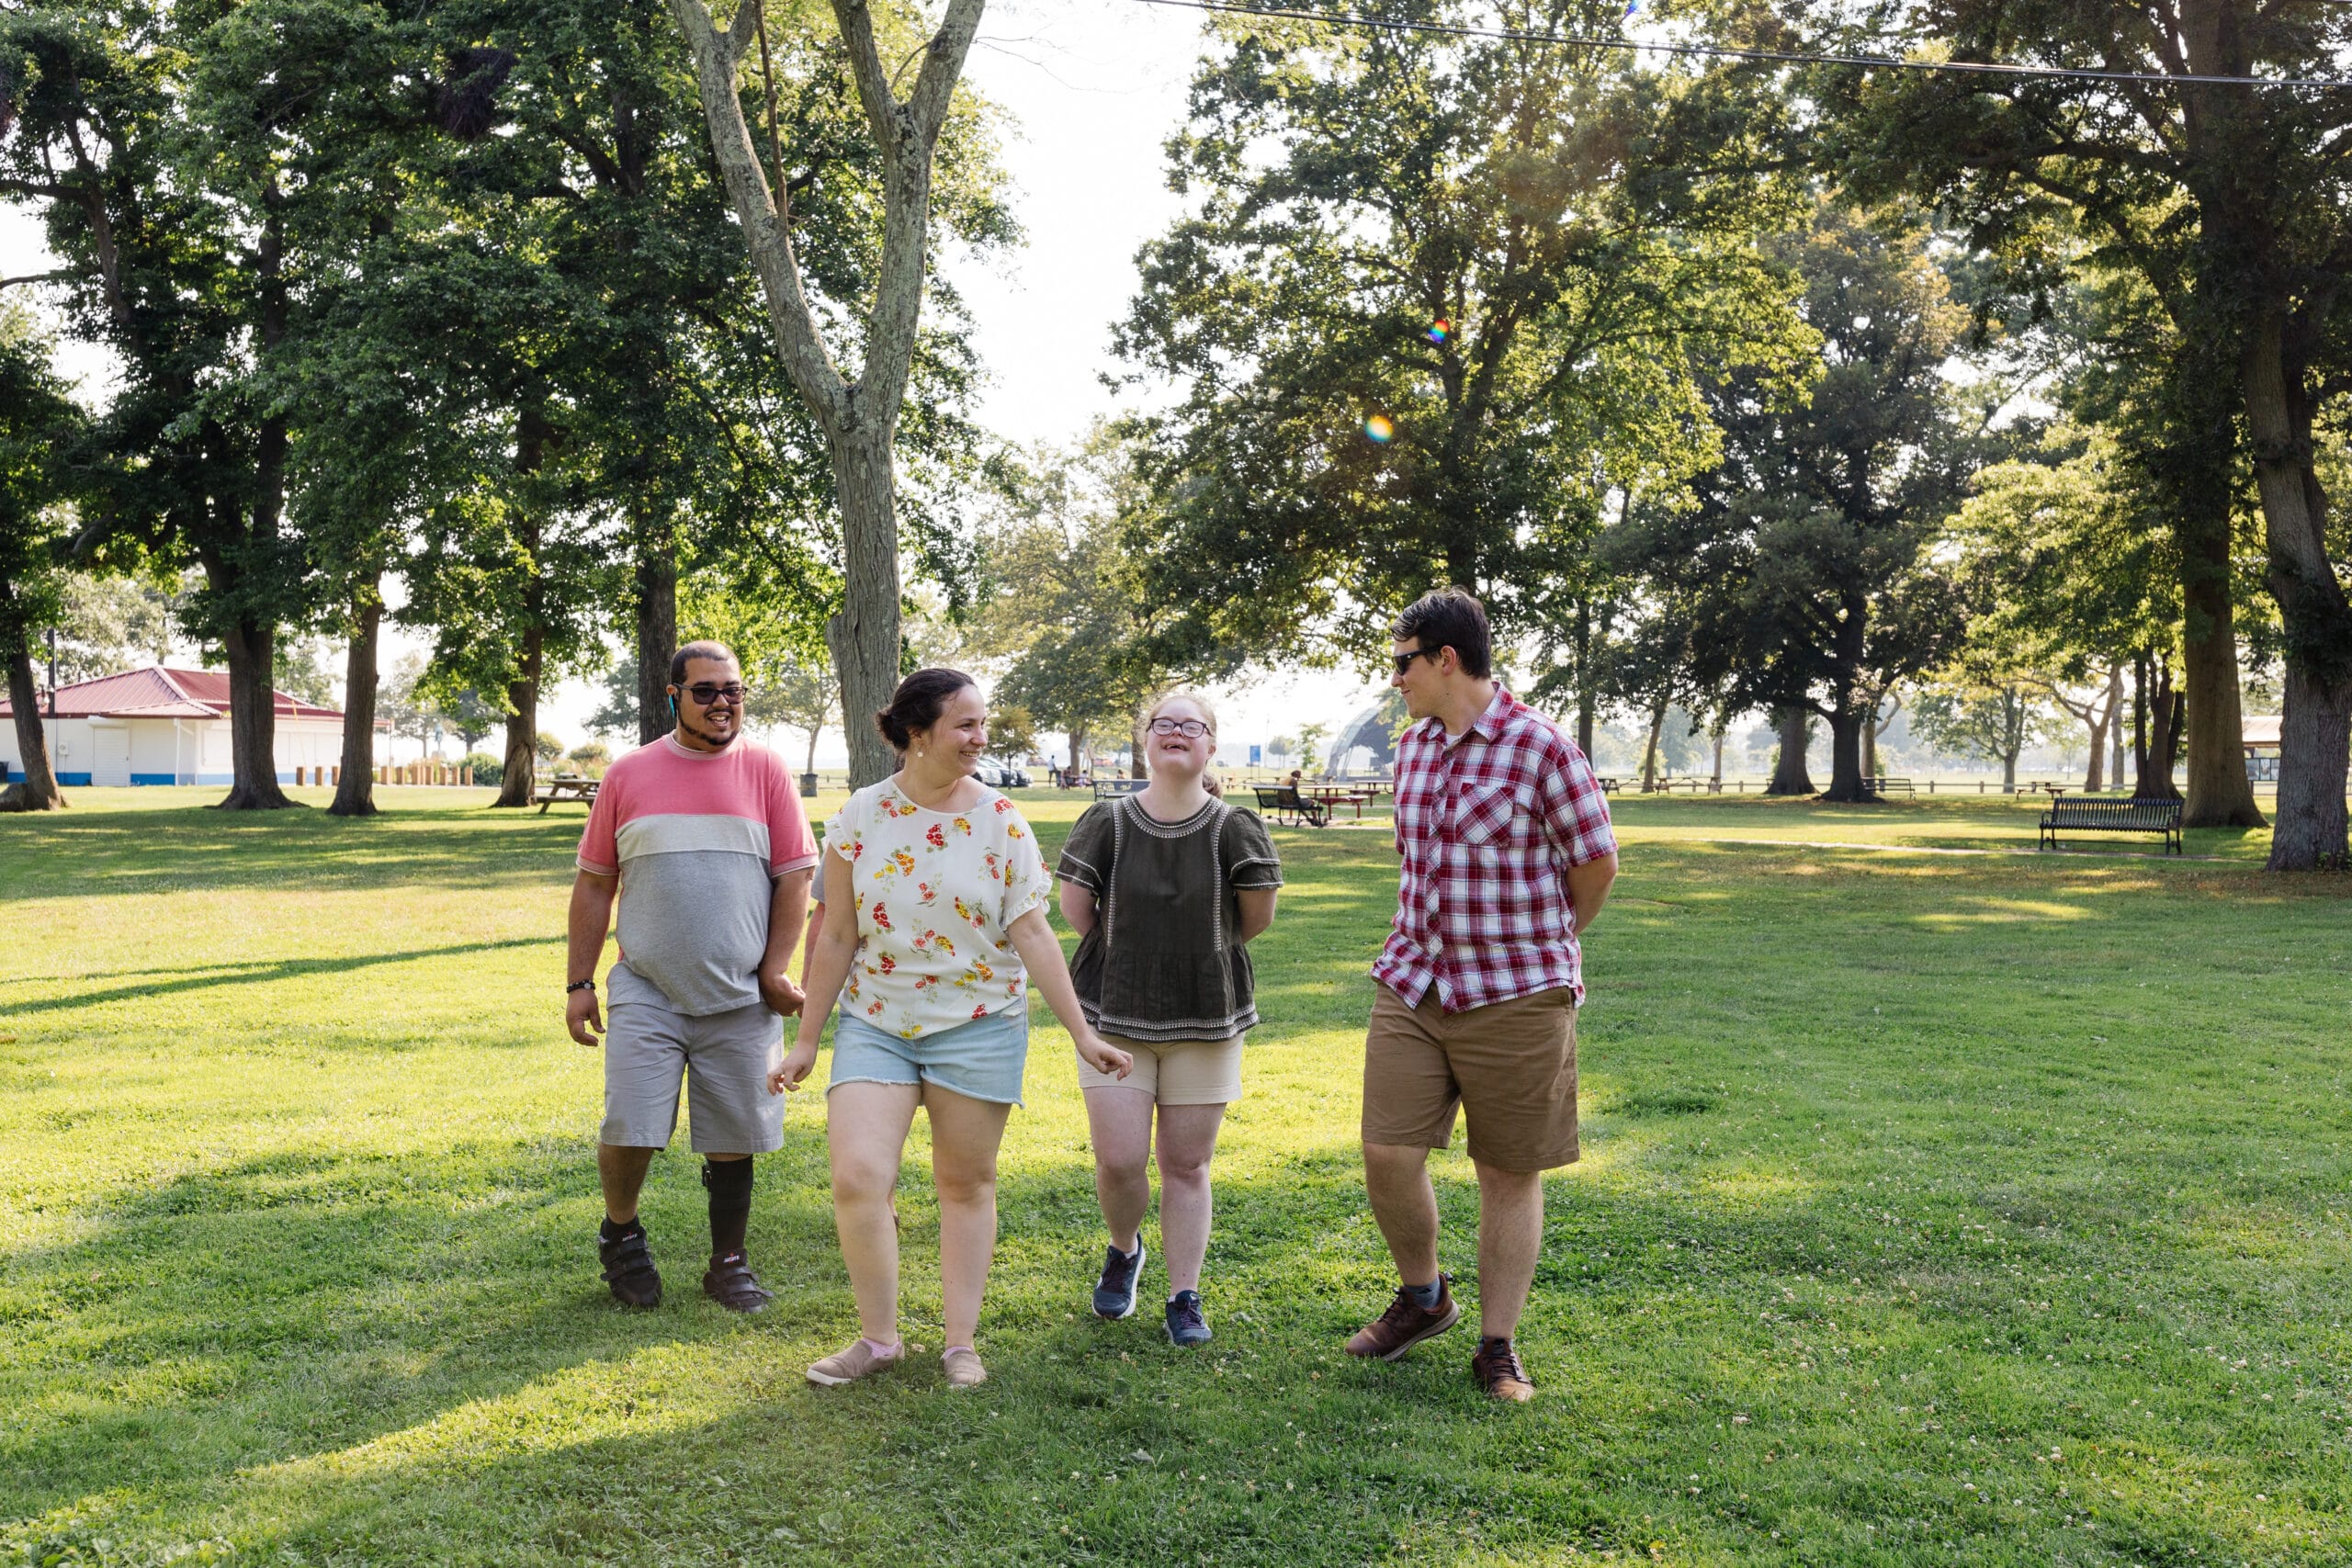 A group of people walking in a park.